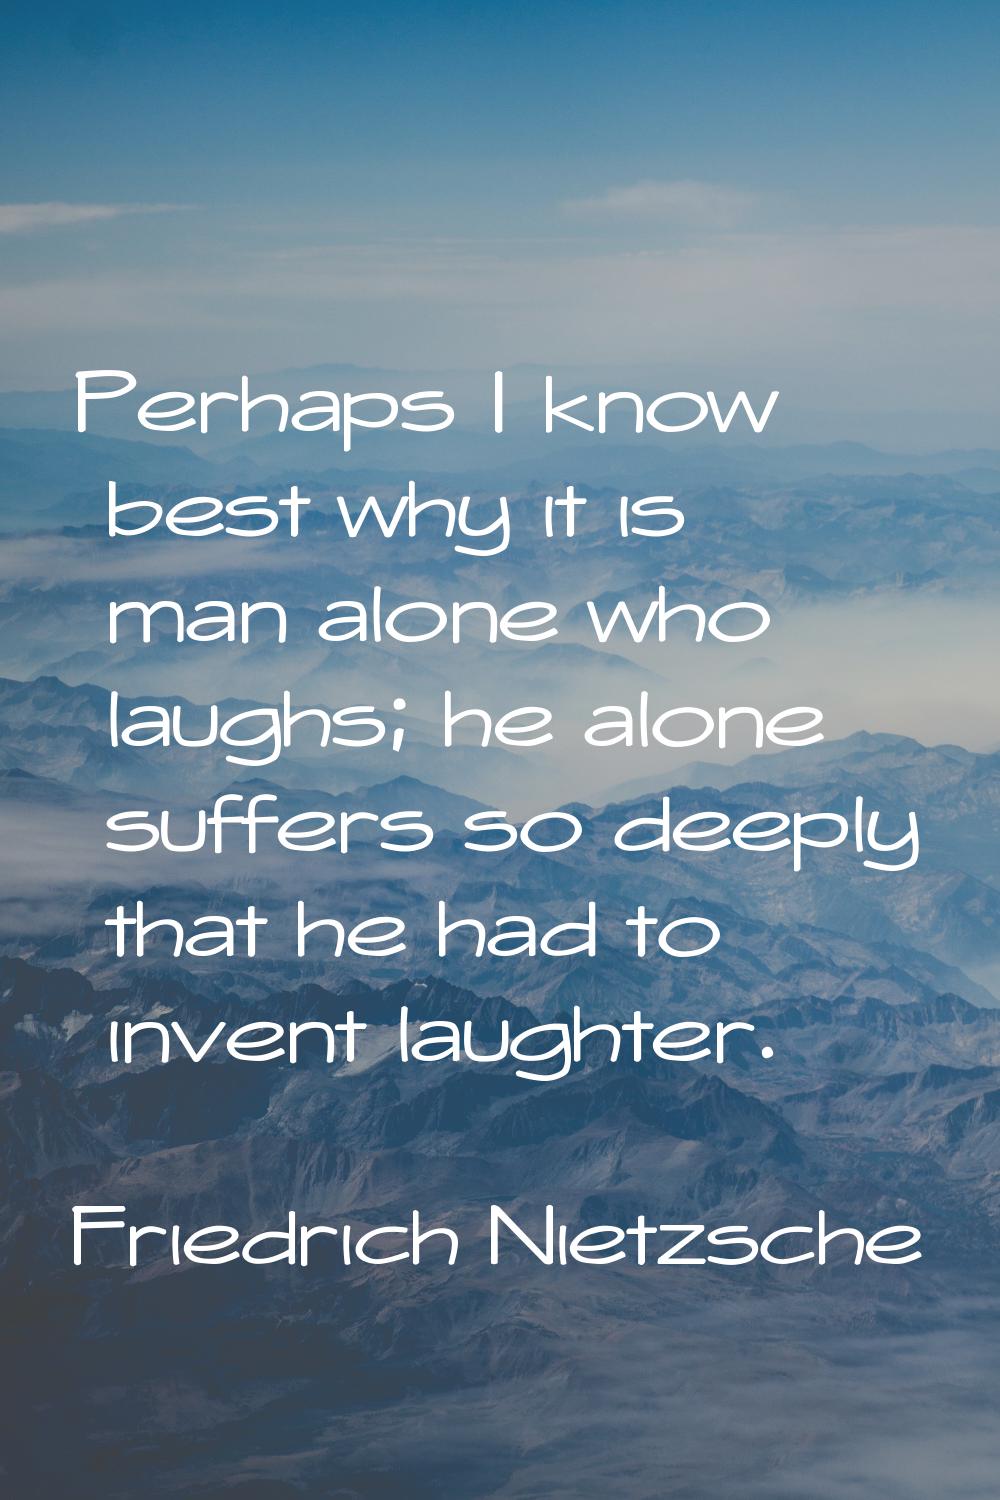 Perhaps I know best why it is man alone who laughs; he alone suffers so deeply that he had to inven